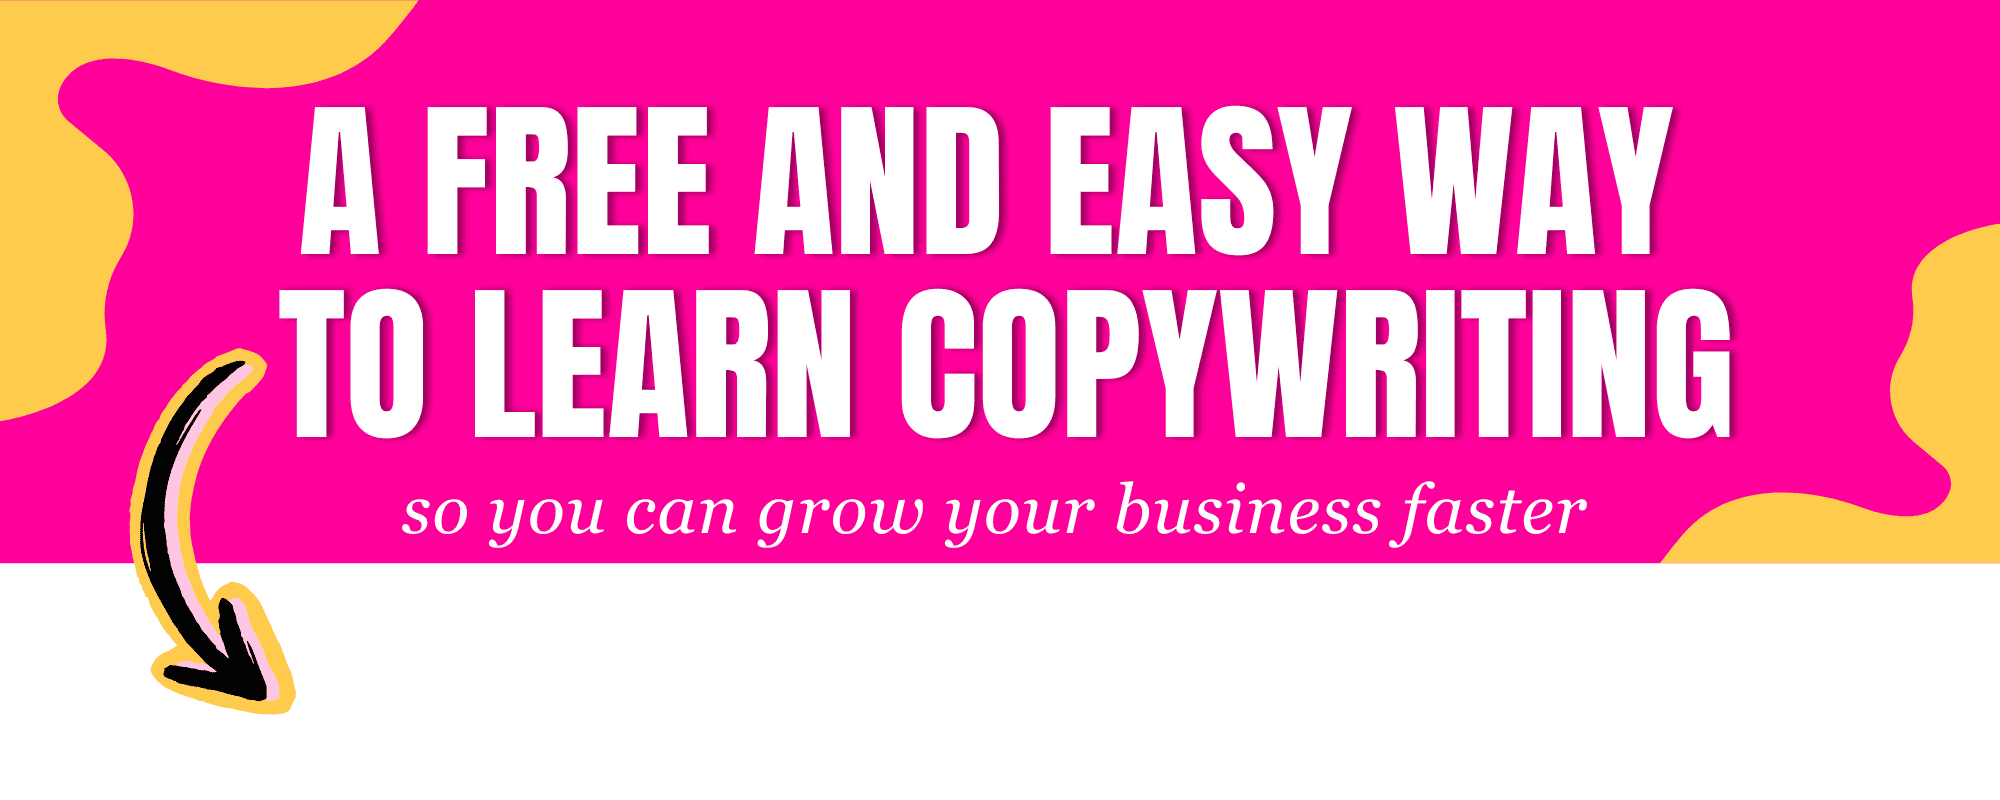 A free and easy way to learn copywriting. So you can grow your business faster.